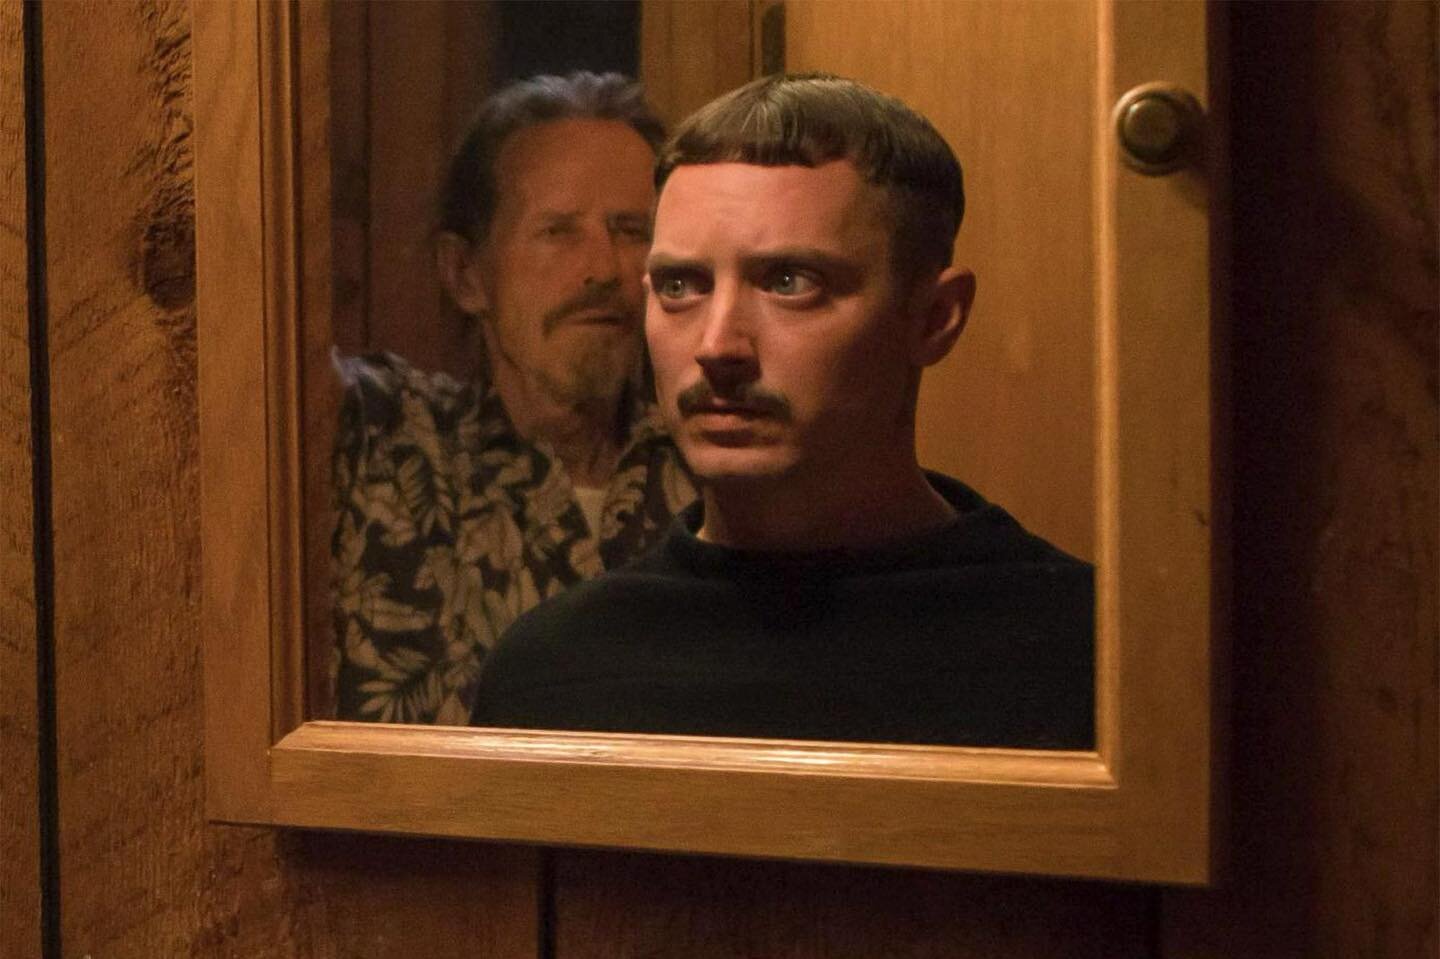 Saturday night movie night and can&rsquo;t decide what to watch? We&rsquo;ve got you. Watch the chilling events of a son finding out his father isn&rsquo;t who he thought in Come To Daddy, starting Elijah Wood. 

#cometodaddymovie